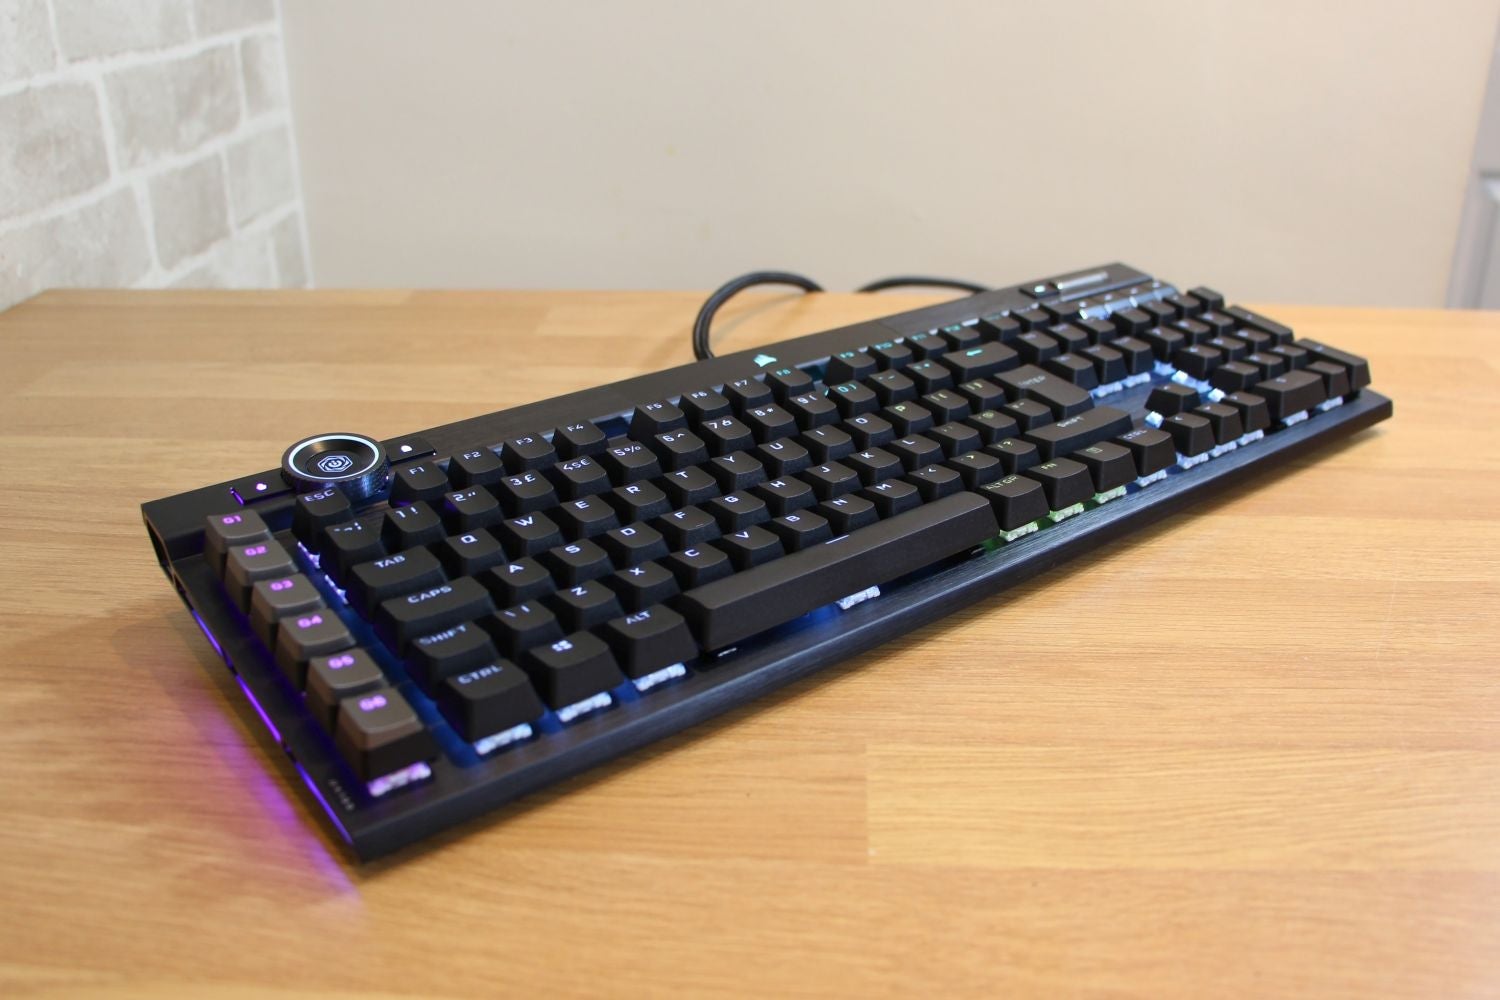 The Corsair K100 features opto-mechanical switches that are speedier than standard mechanical switches